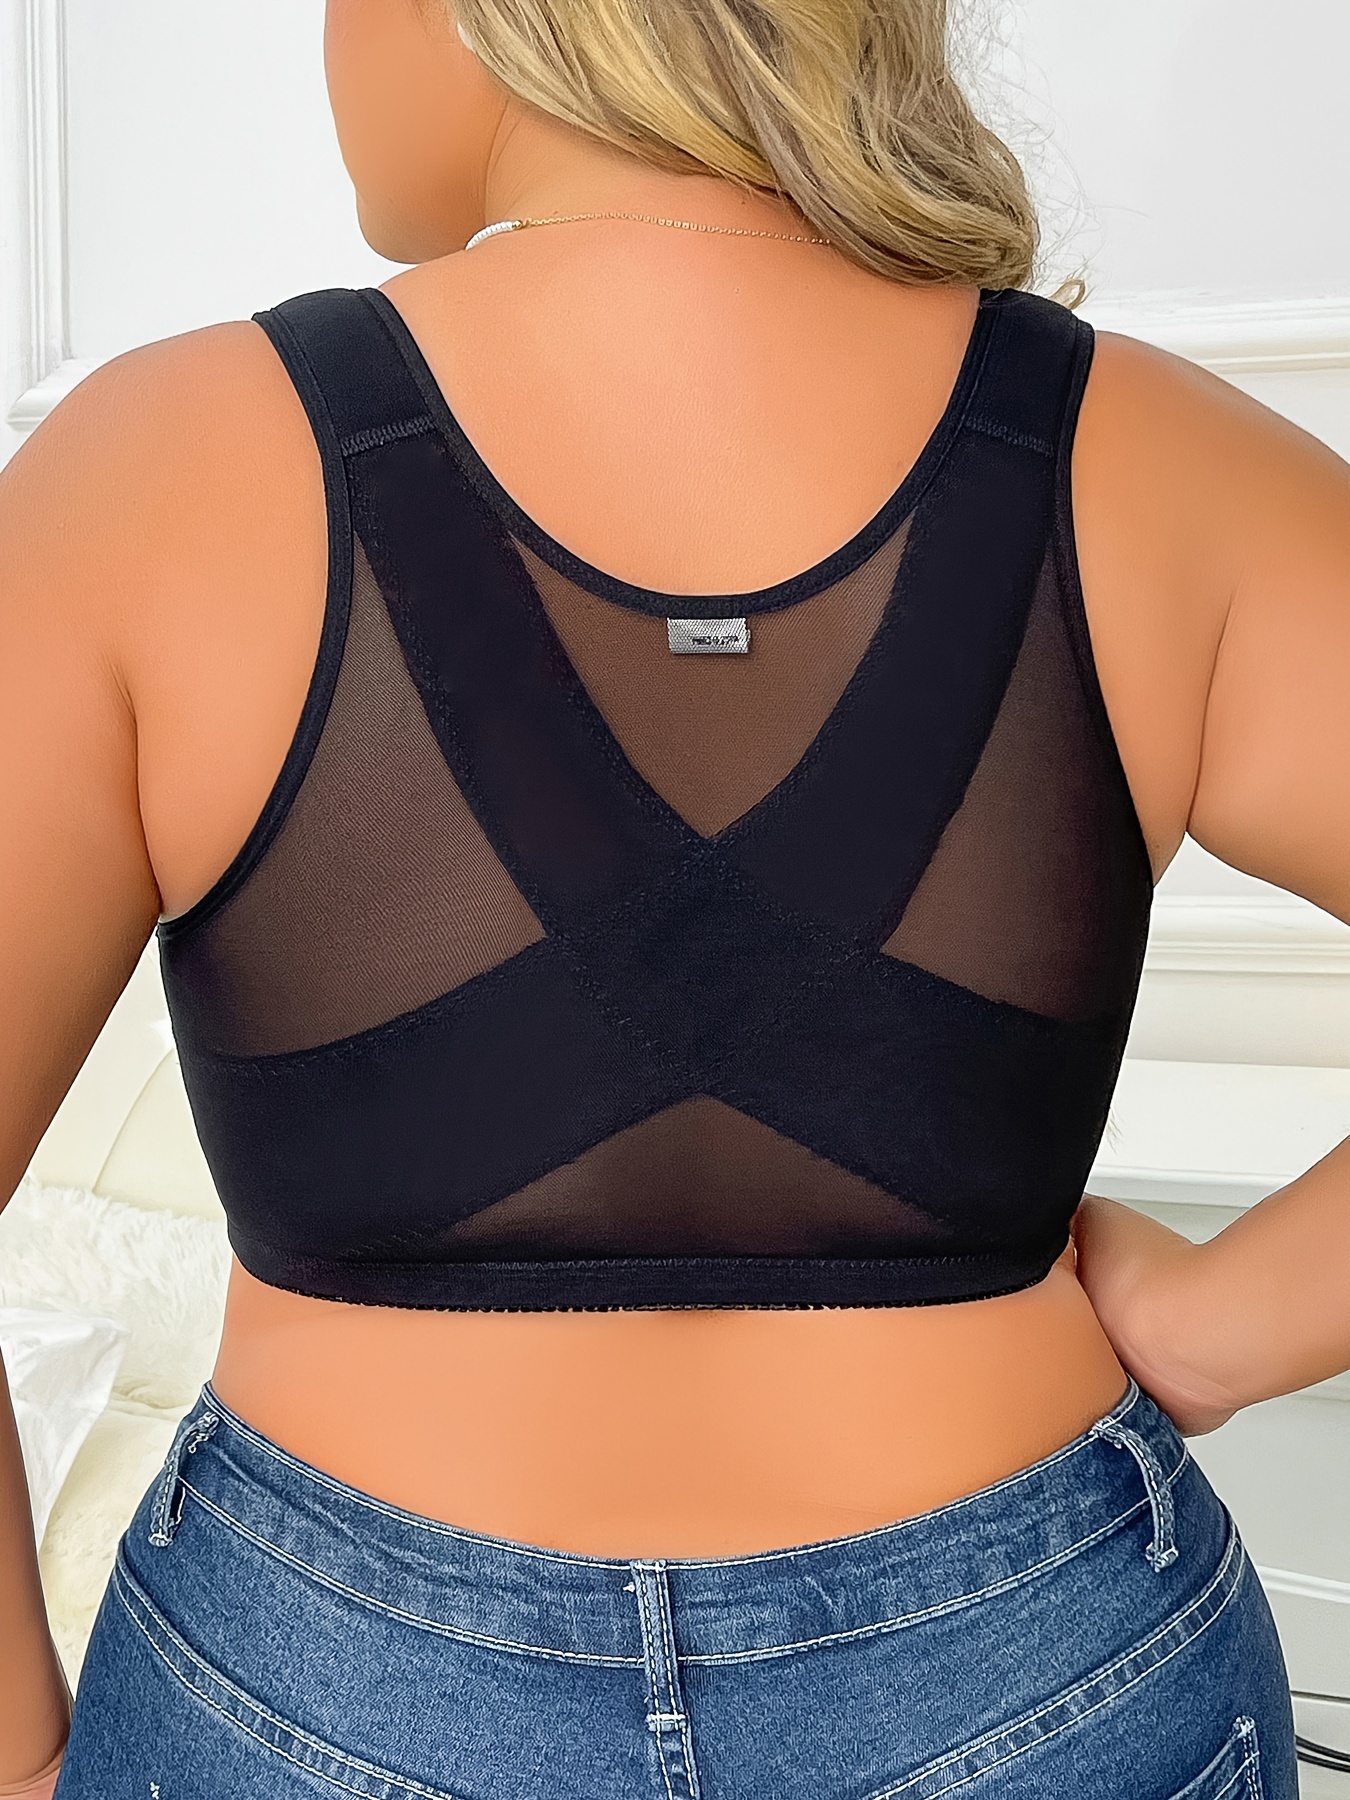 Women's Front Close Snap Bras, Plus Size Full Coverage Wireless